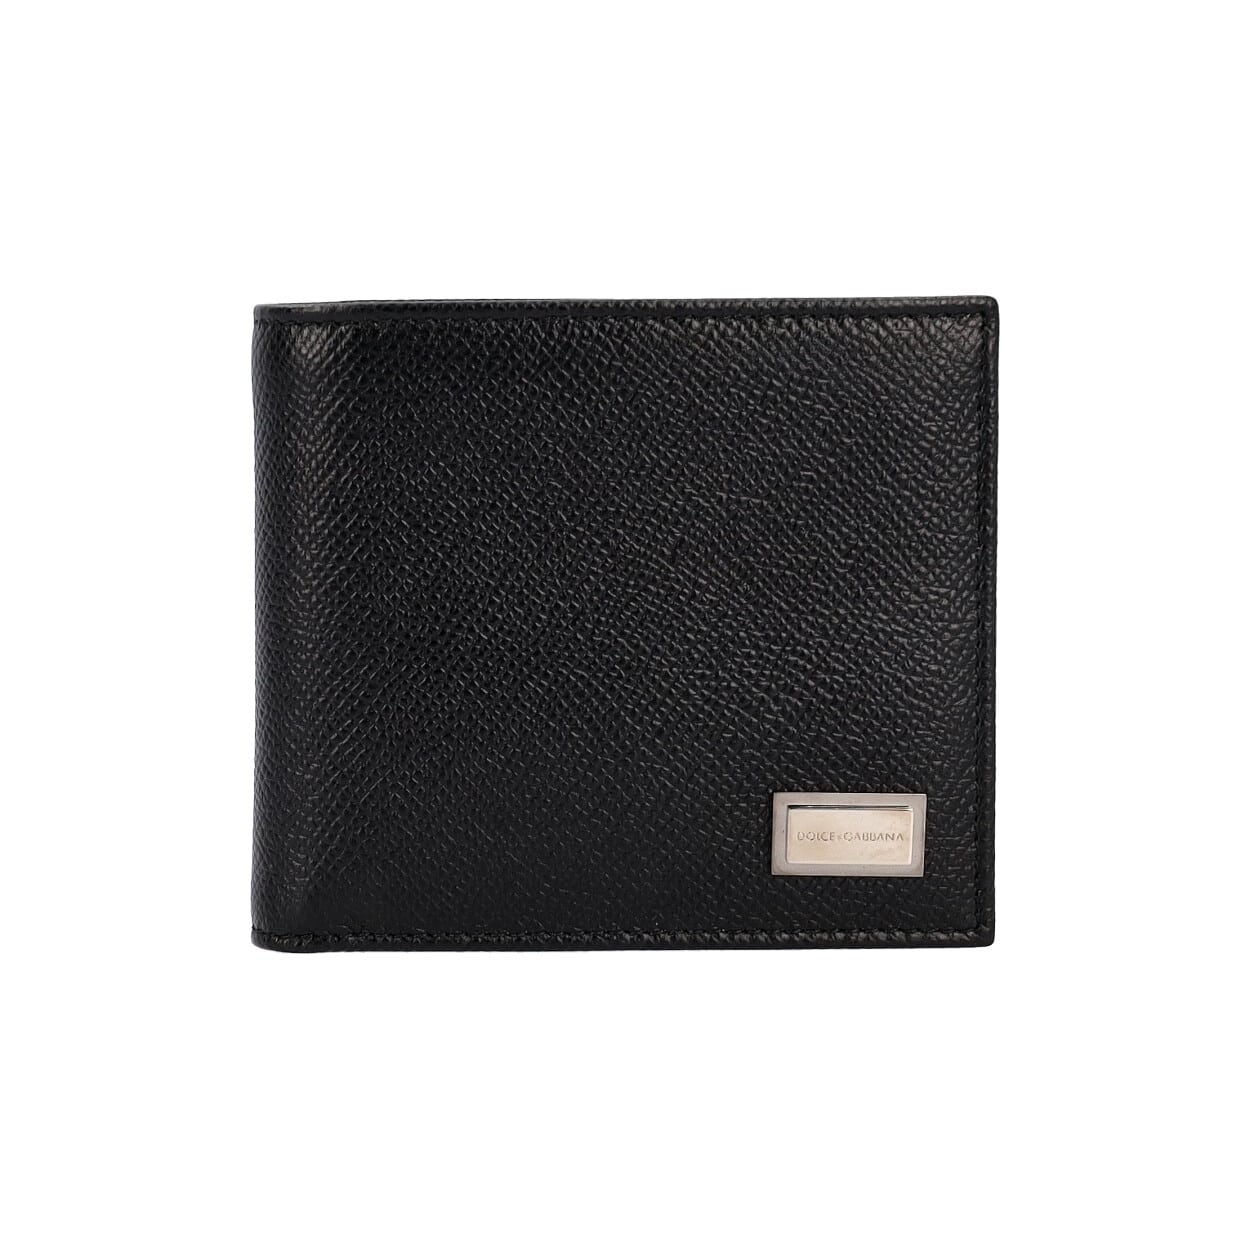 DOLCE & GABBANA Leather Bifold Wallet Black - NEW | Luxity